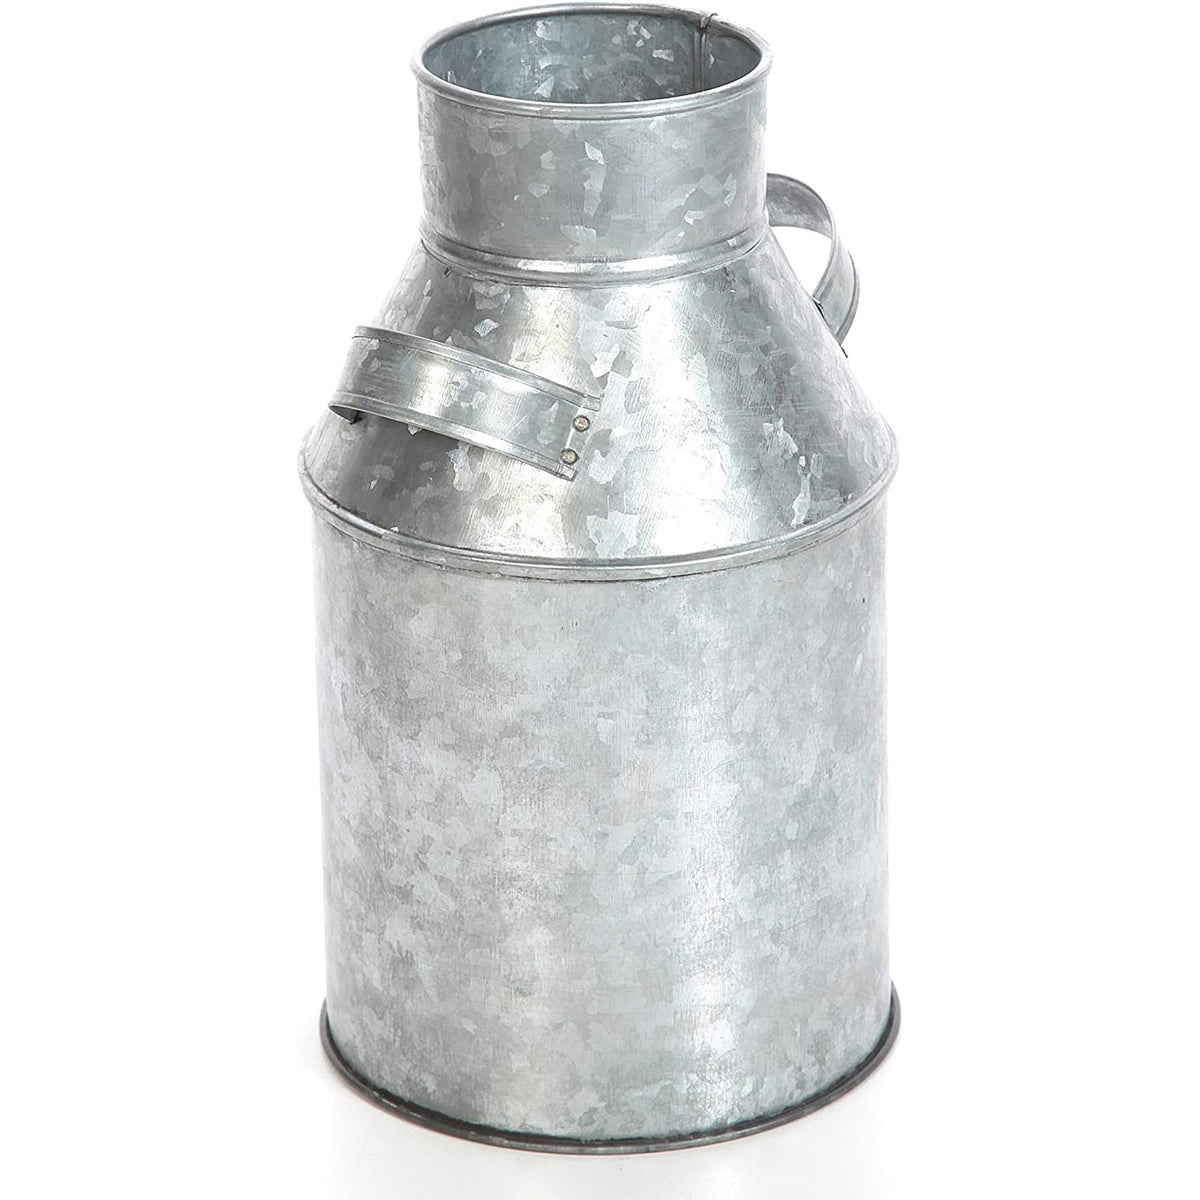 HOSLEY® Iron Galvanized Milk Can,  9.75 inches High